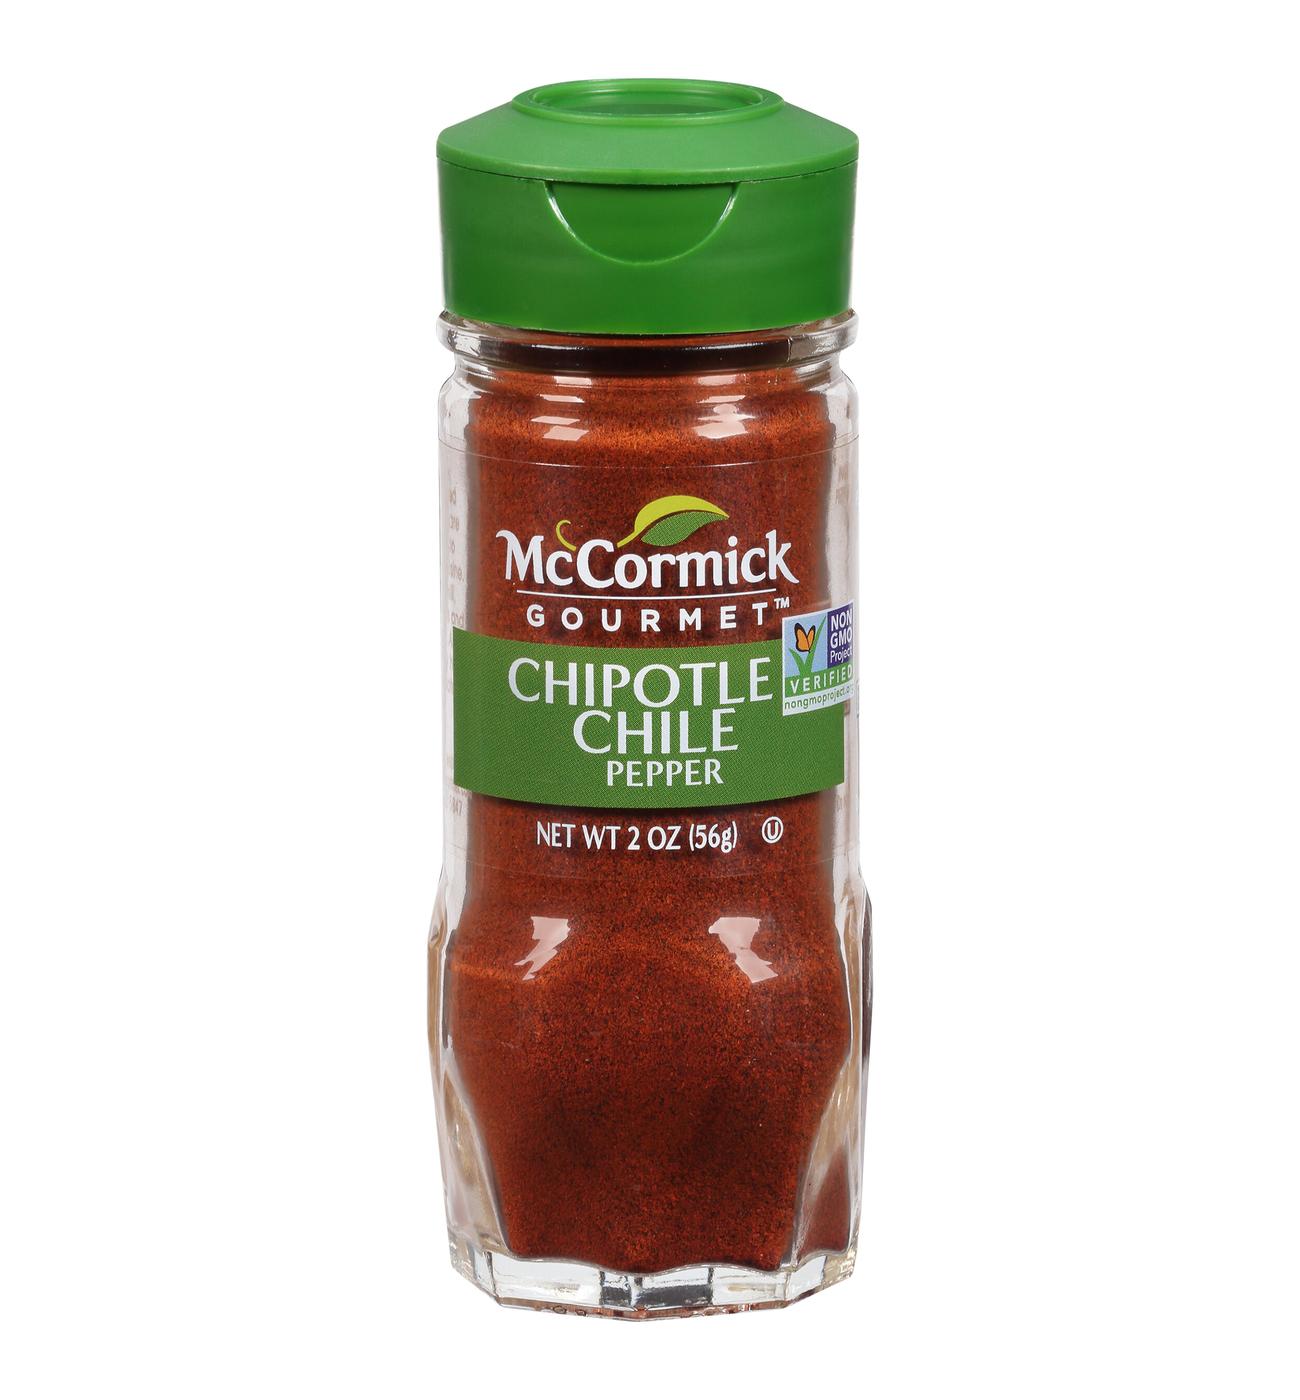 McCormick Gourmet Collection Chipotle Chile Pepper; image 1 of 5